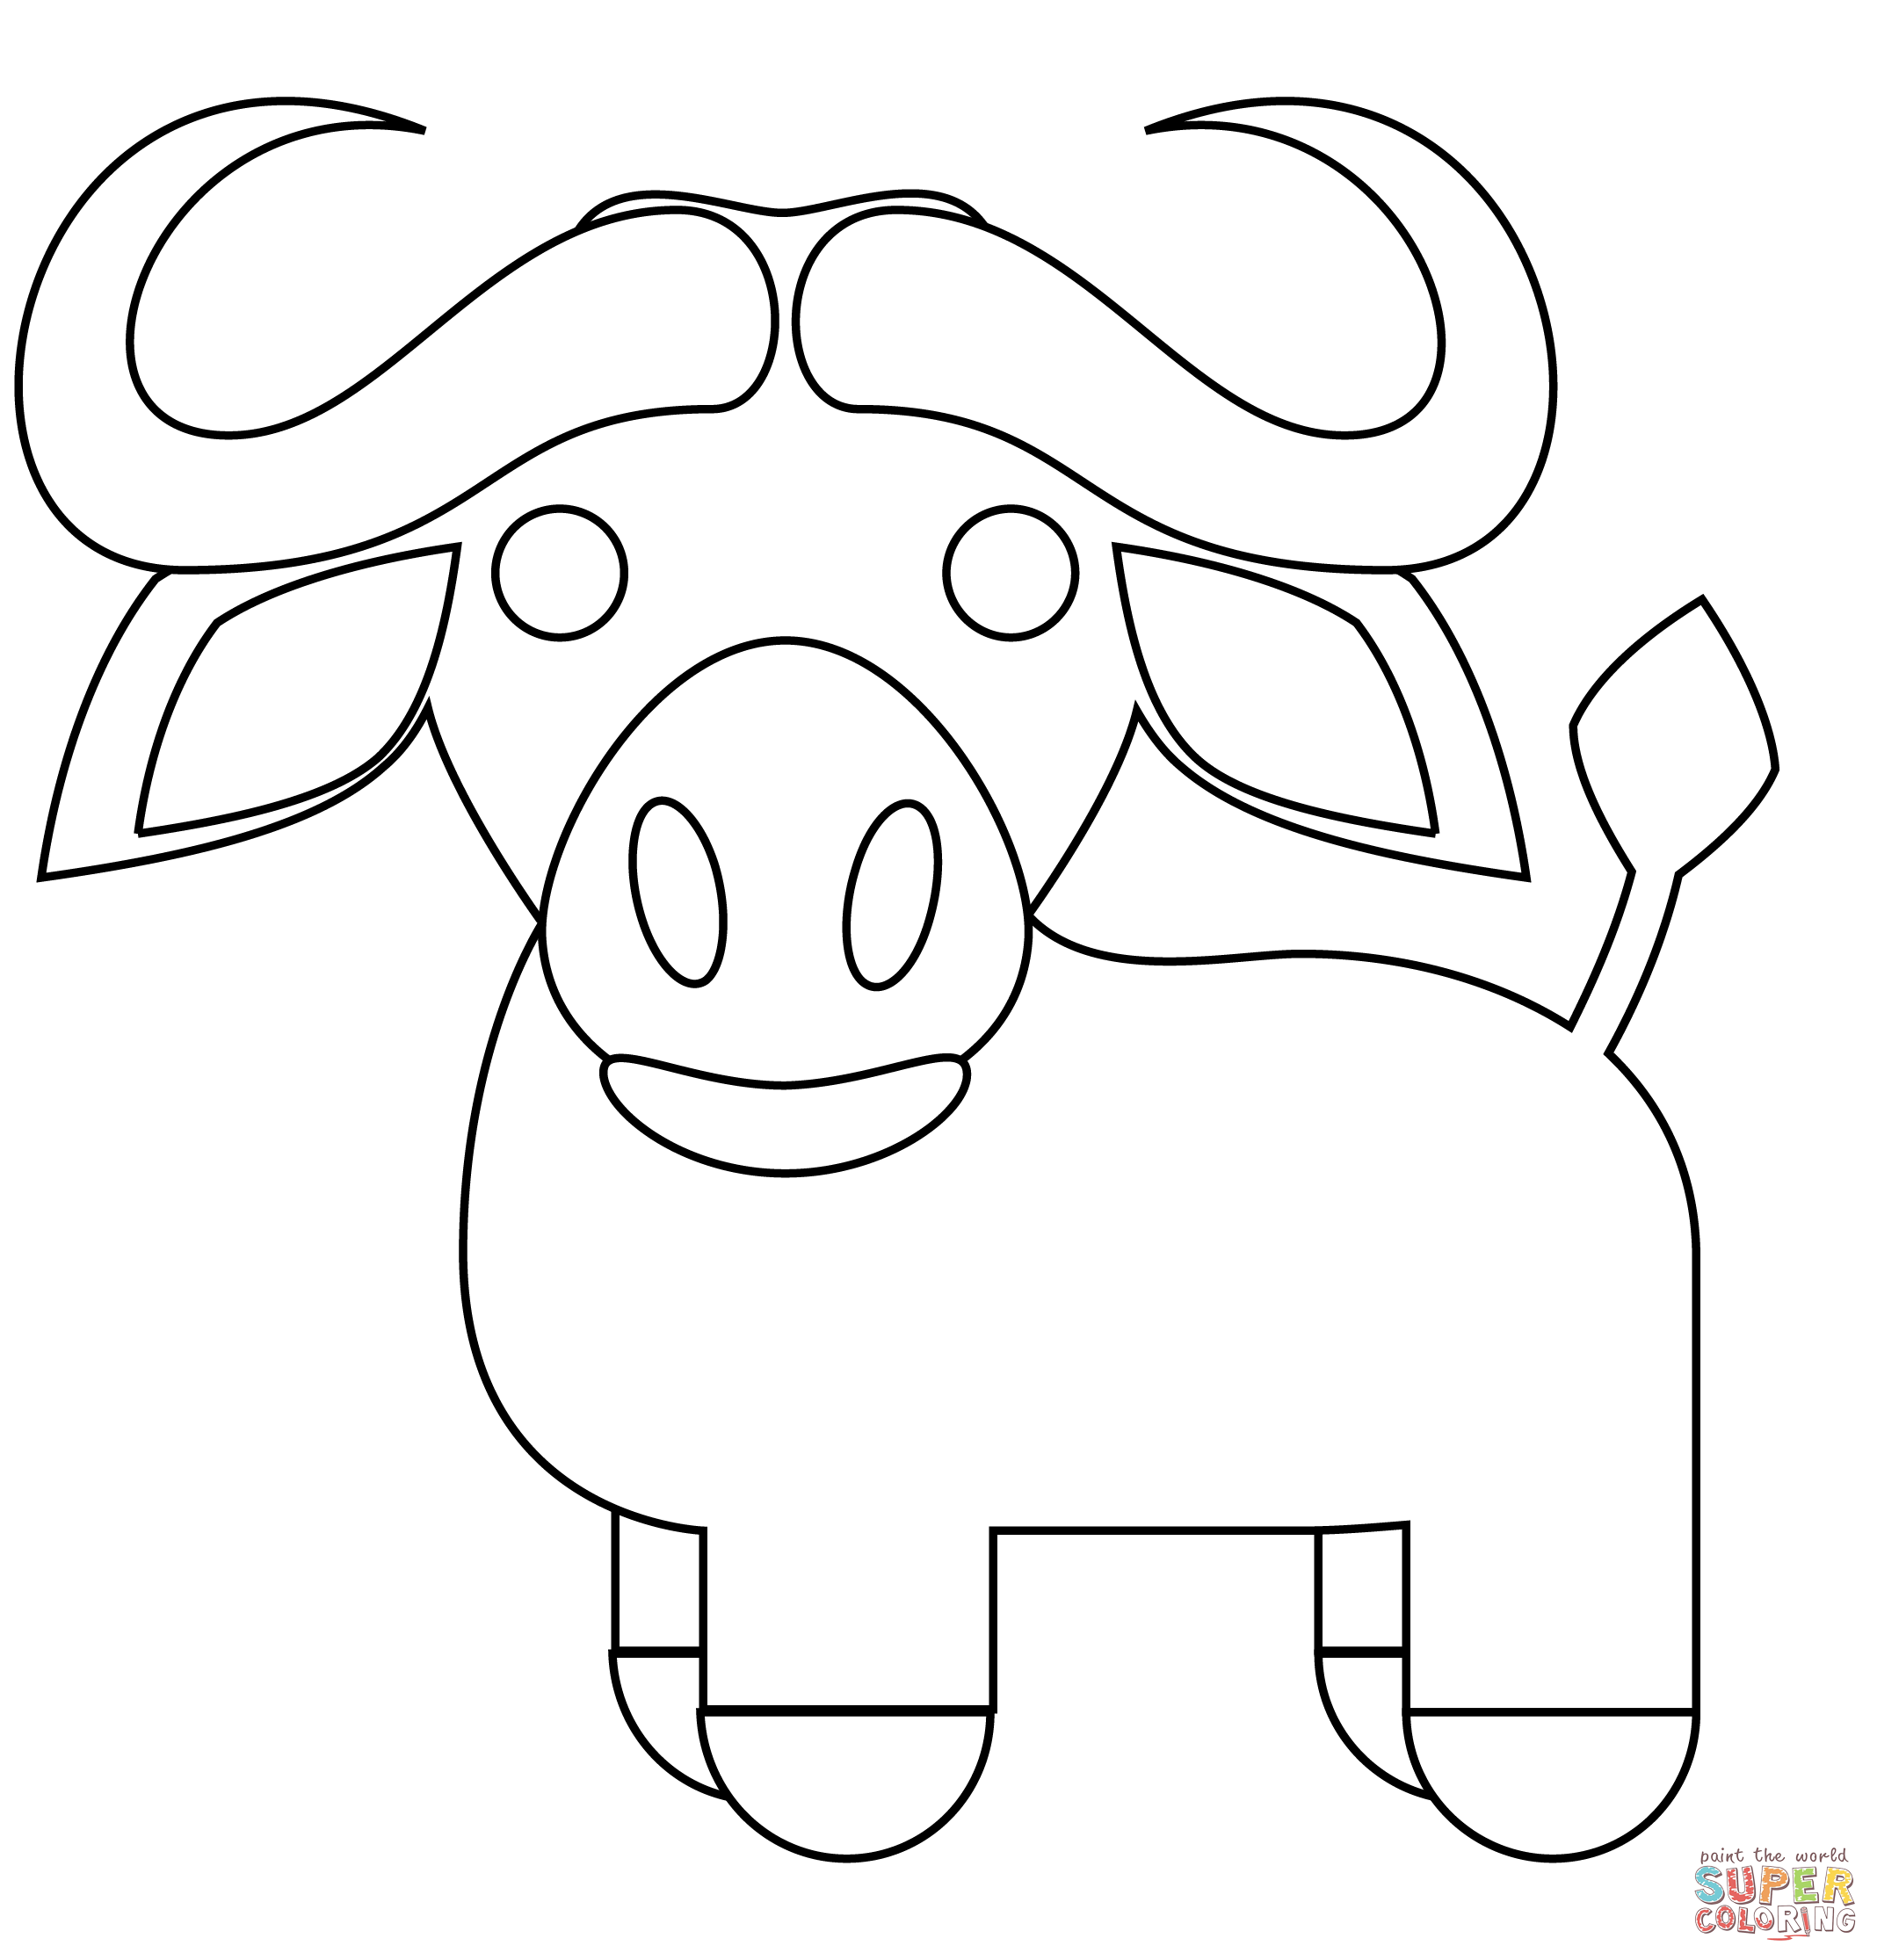 Water buffalo coloring page free printable coloring pages